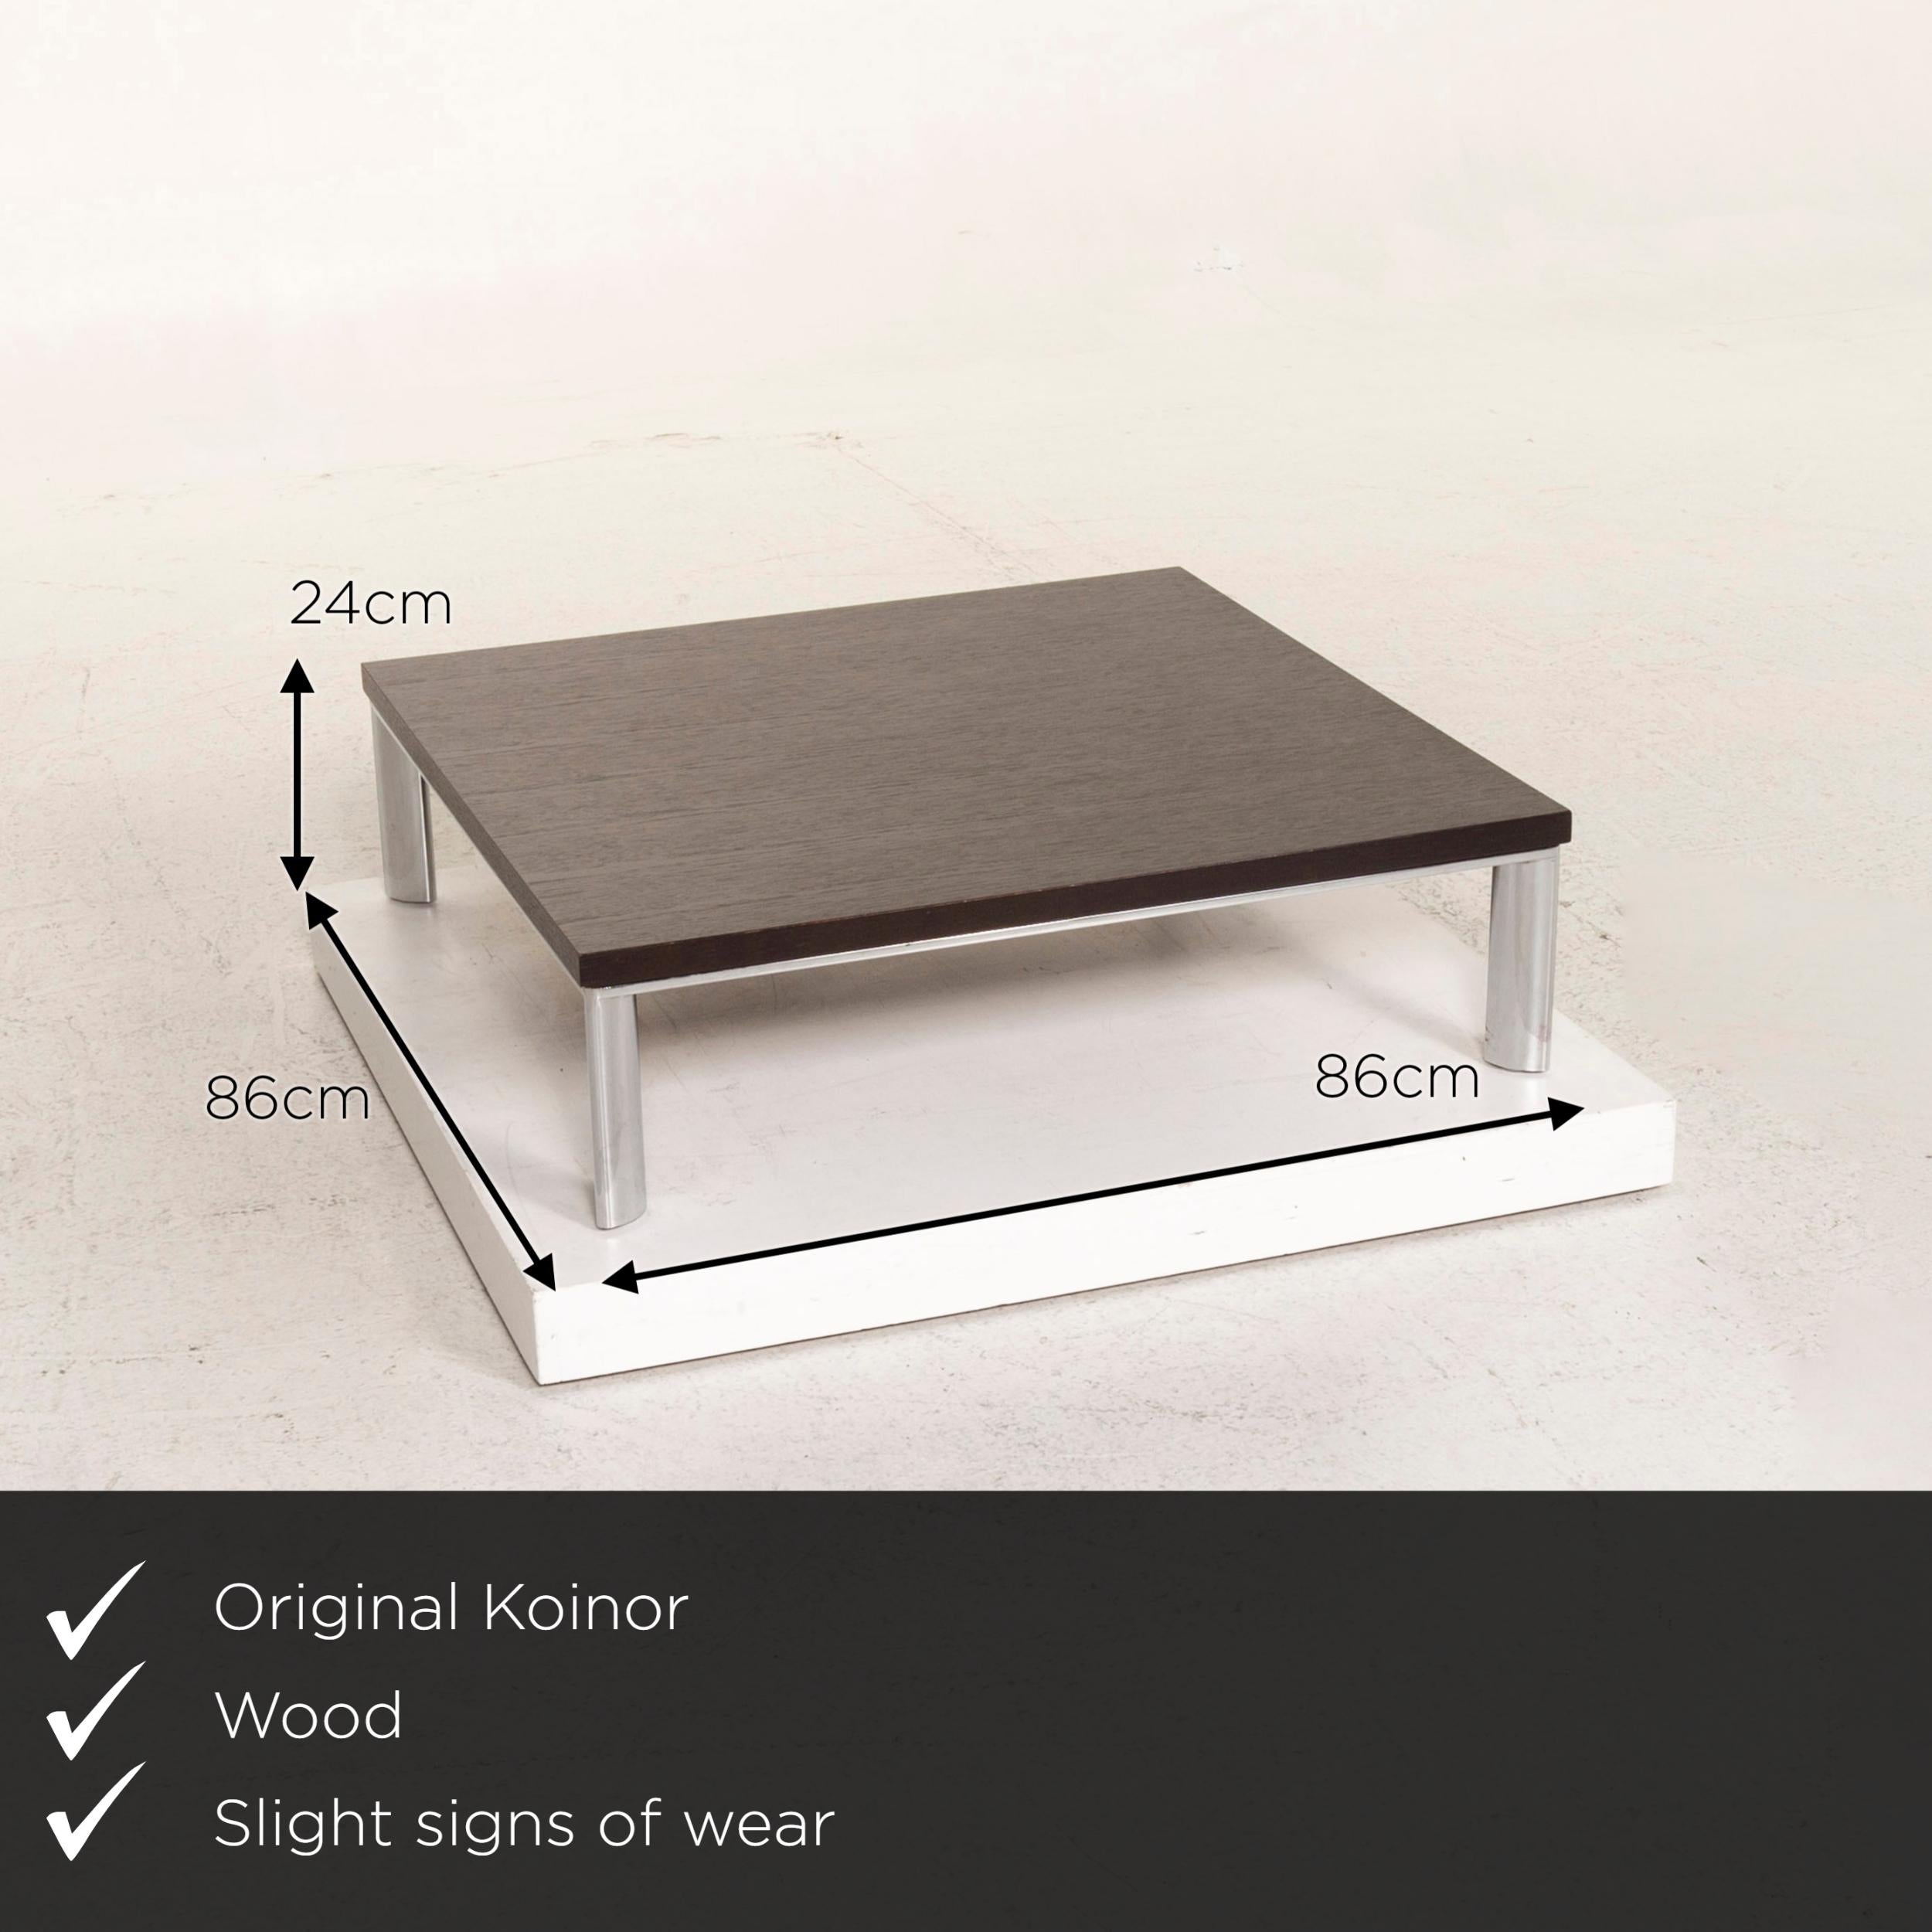 We present to you a Koinor Mondo wood coffee table.

Product measurements in centimeters:

Depth 86
Width 86
Height 24.







   